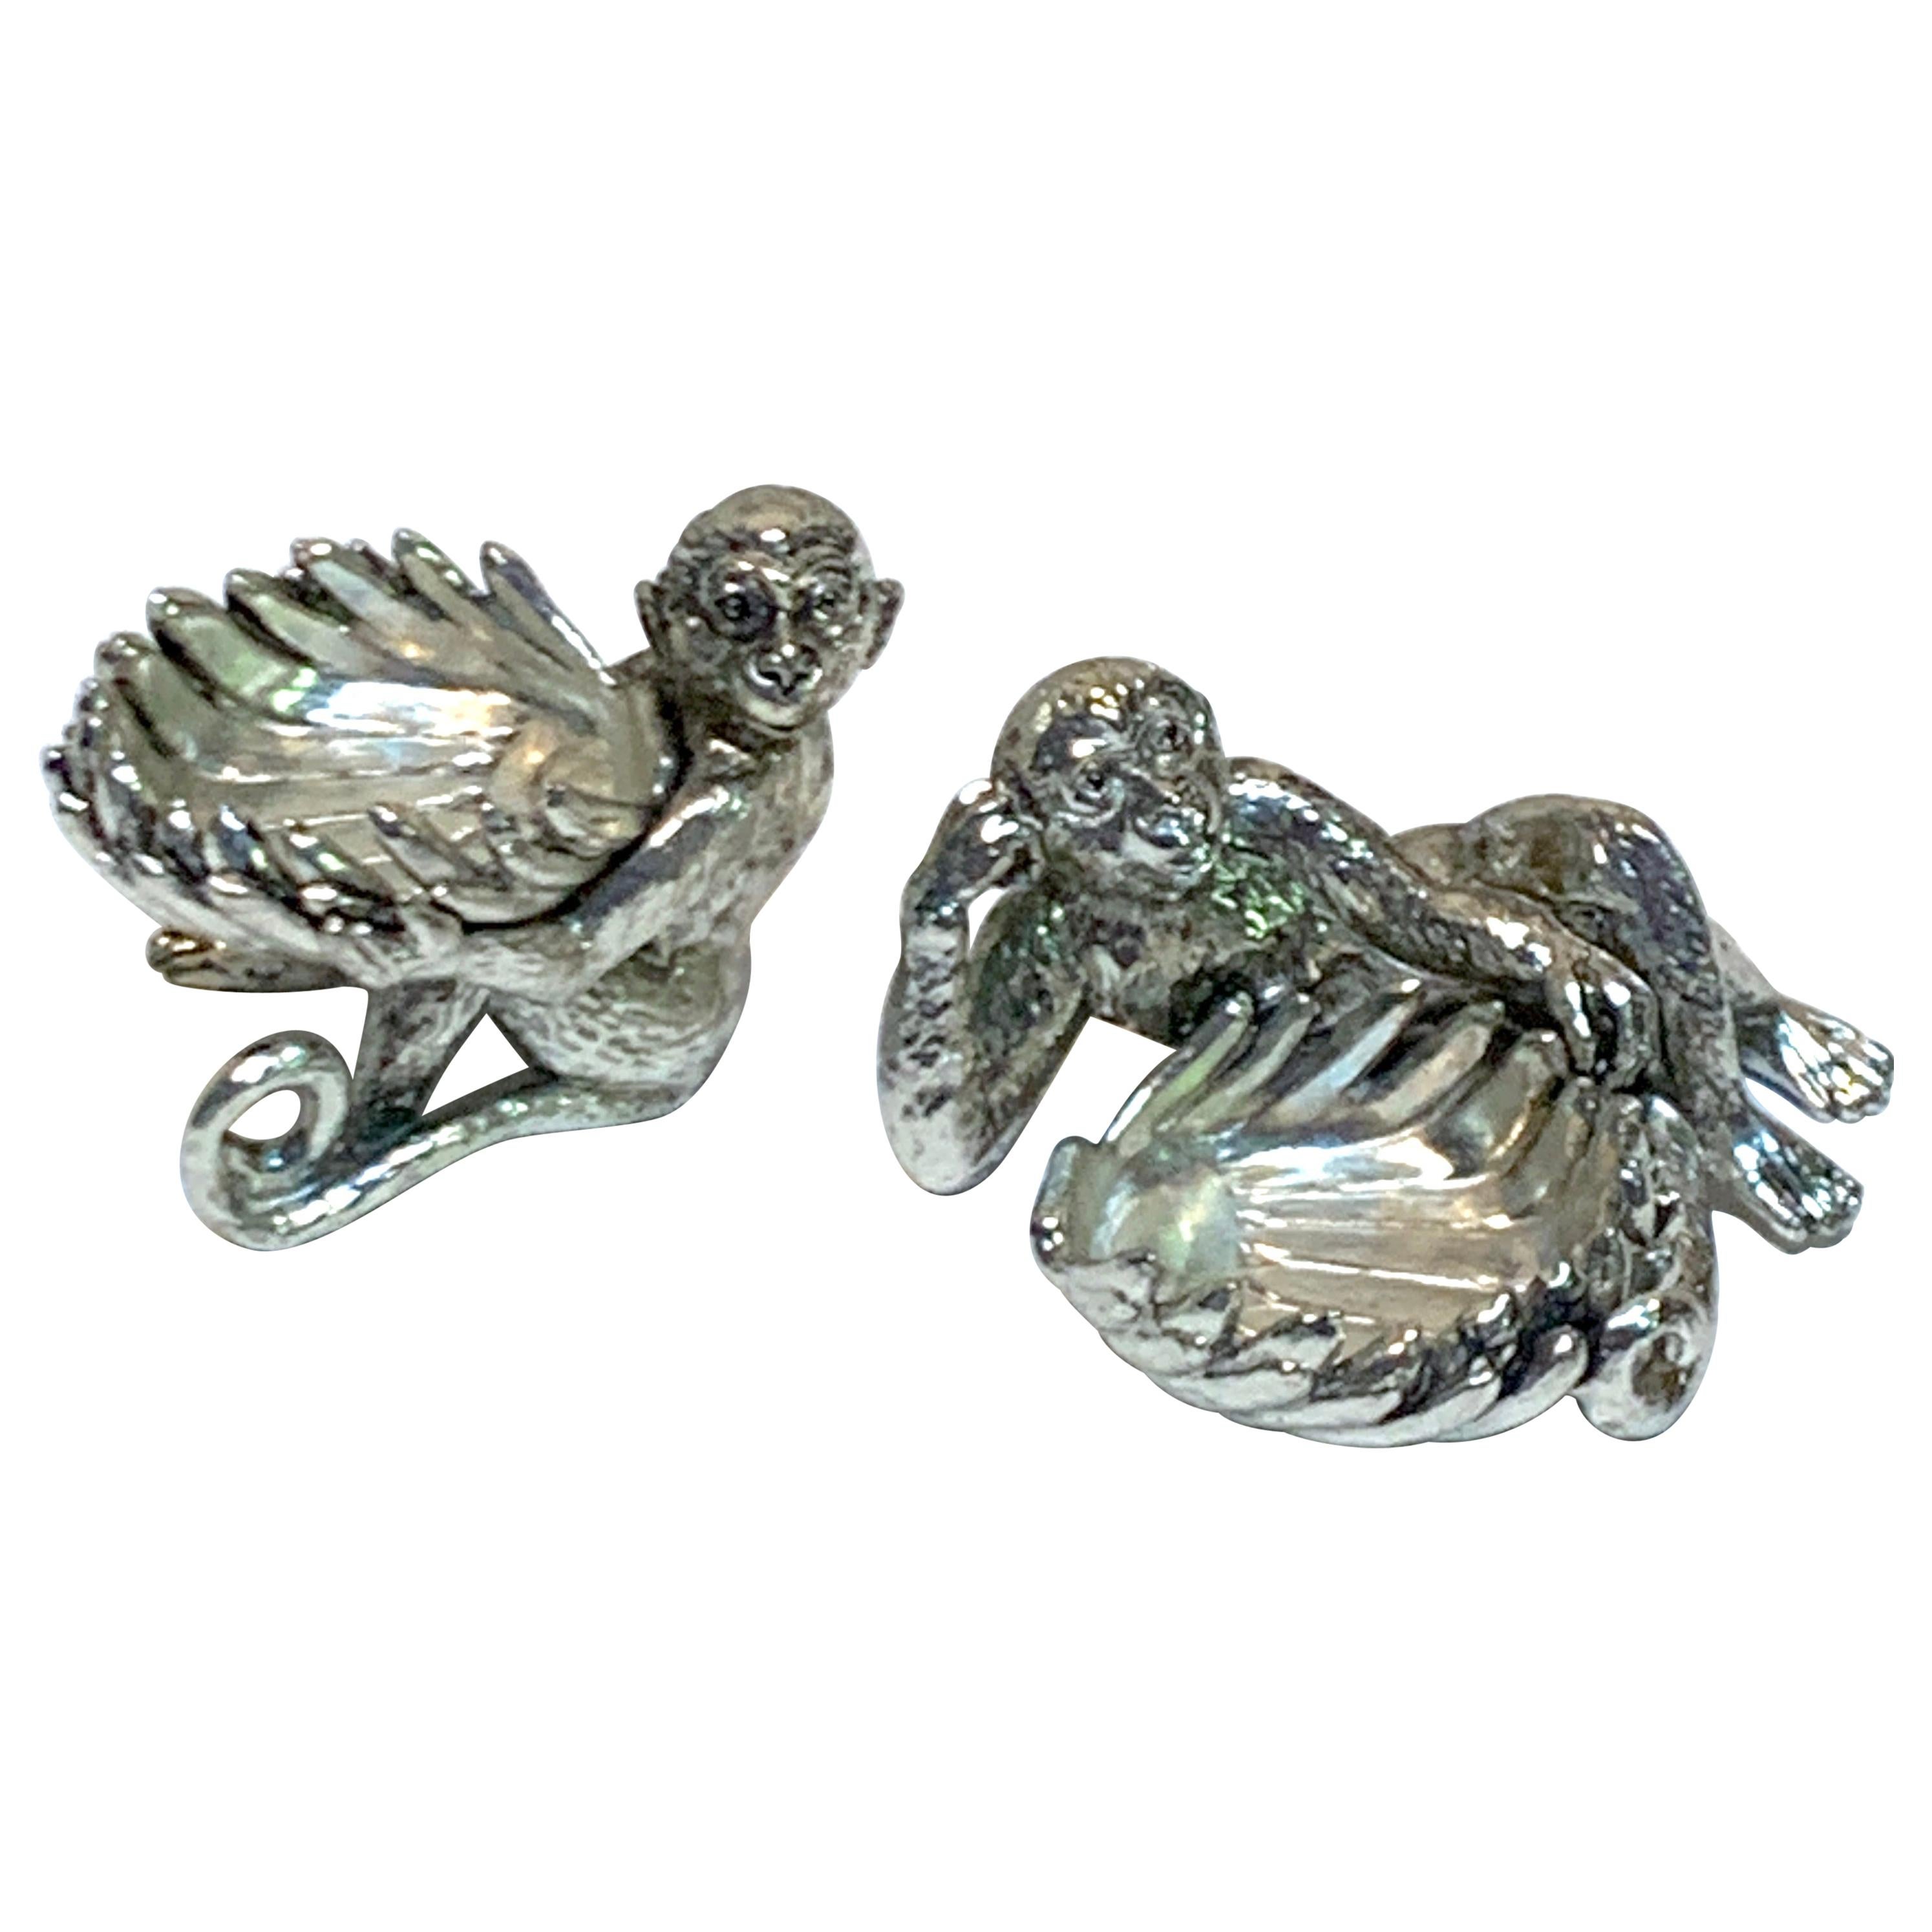 Pair of Silver Plated Reclining Monkey Salts or Nut Dishes